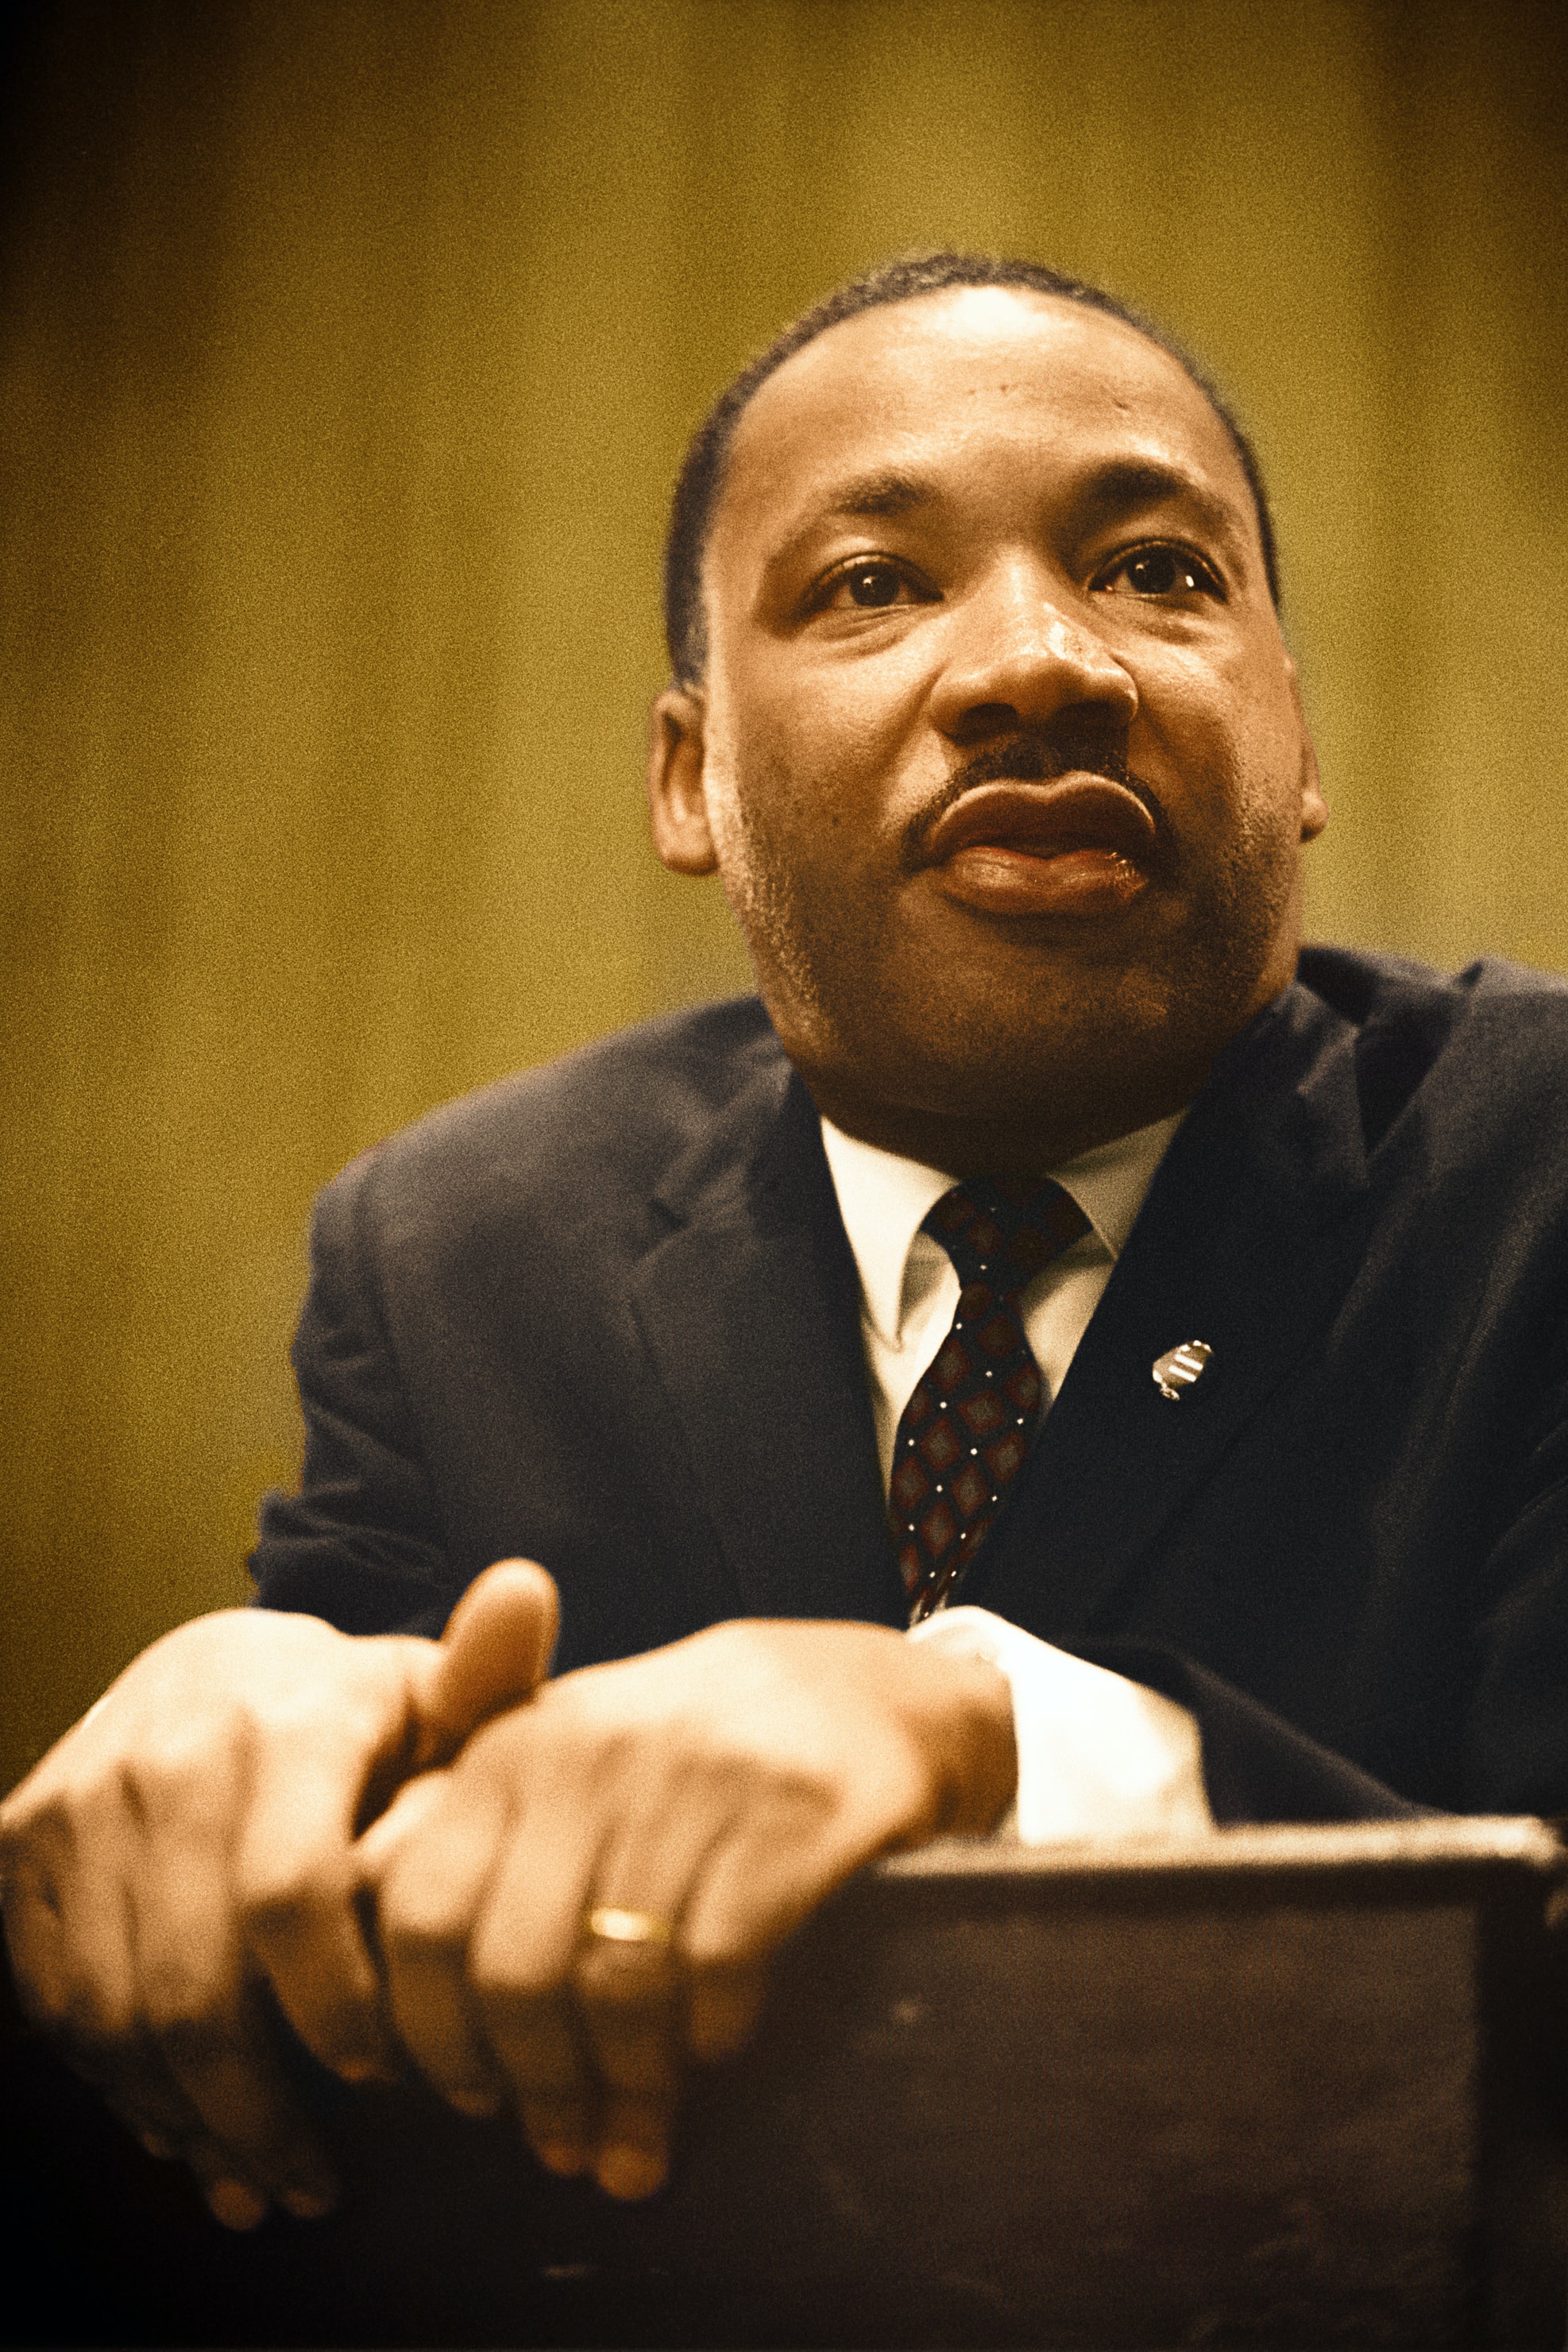 ACEP Offices Closed Monday, Jan 17 in Recognition of Martin Luther King, Jr. Day